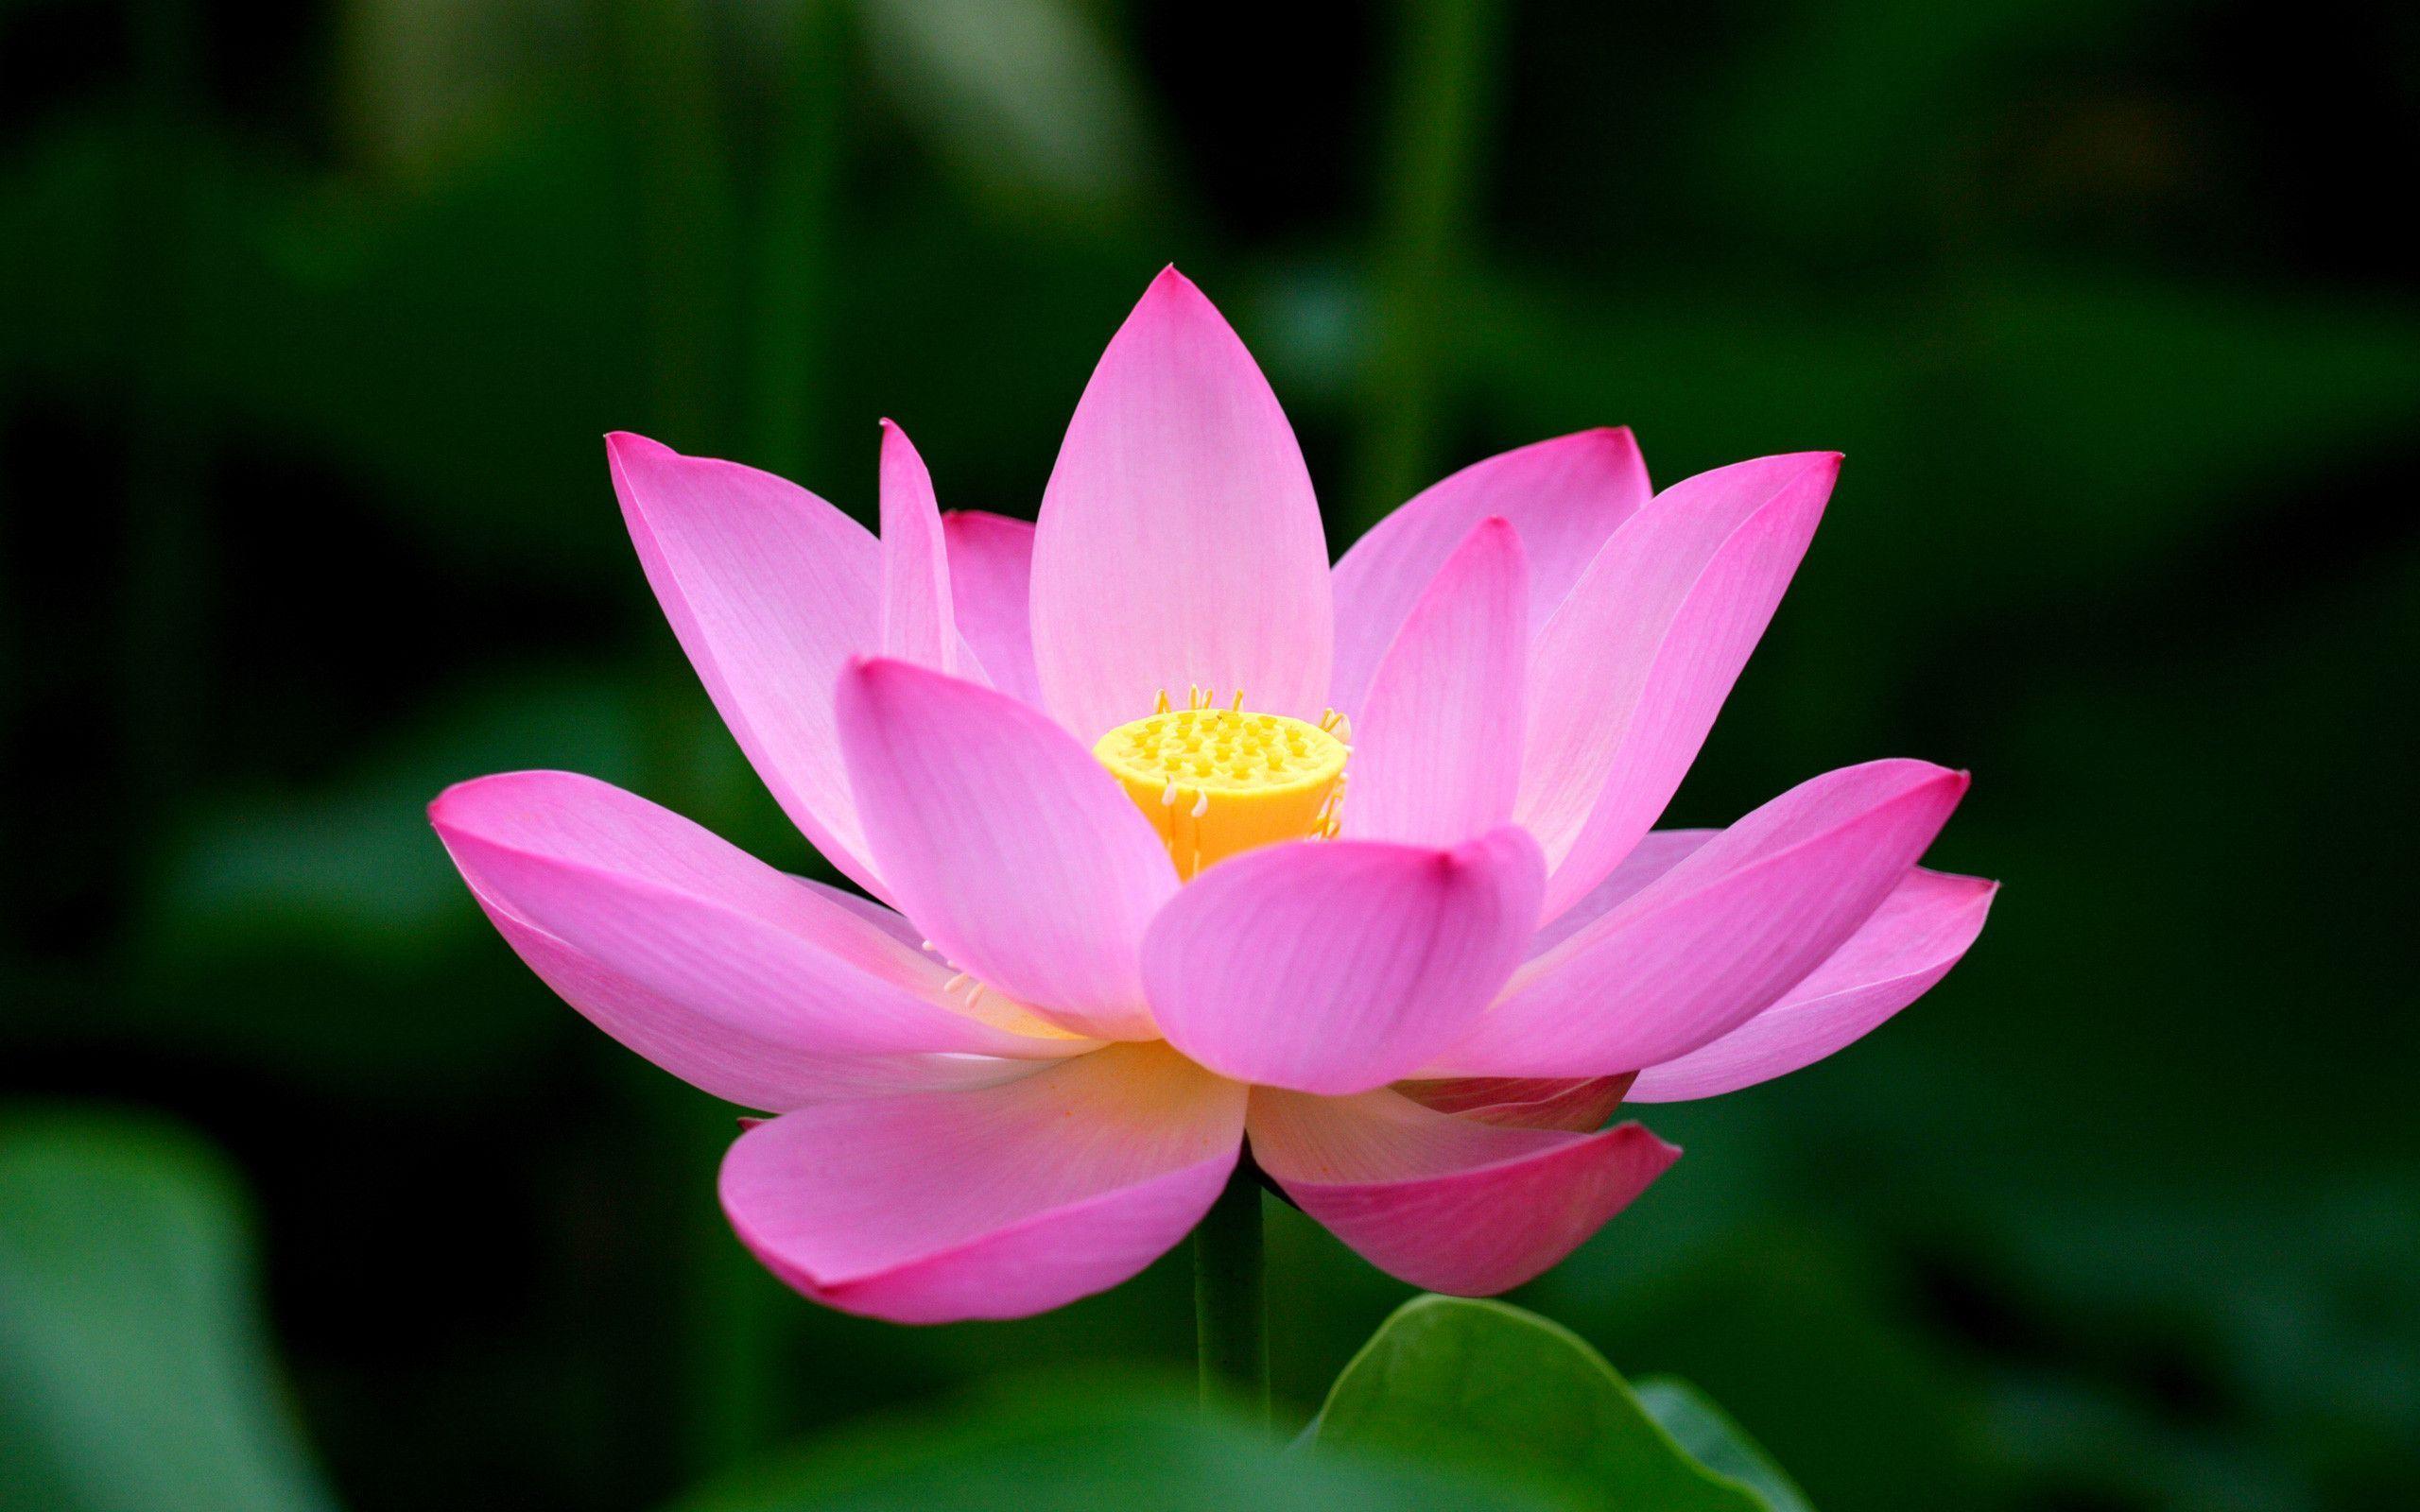 lotus flower wallpaper - Online Discount Shop for Electronics, Apparel, Toys, Books, Games, Computers, Shoes, Jewelry, Watches, Baby Products, Sports & Outdoors, Office Products, Bed & Bath, Furniture, Tools, Hardware, Automotive Parts,